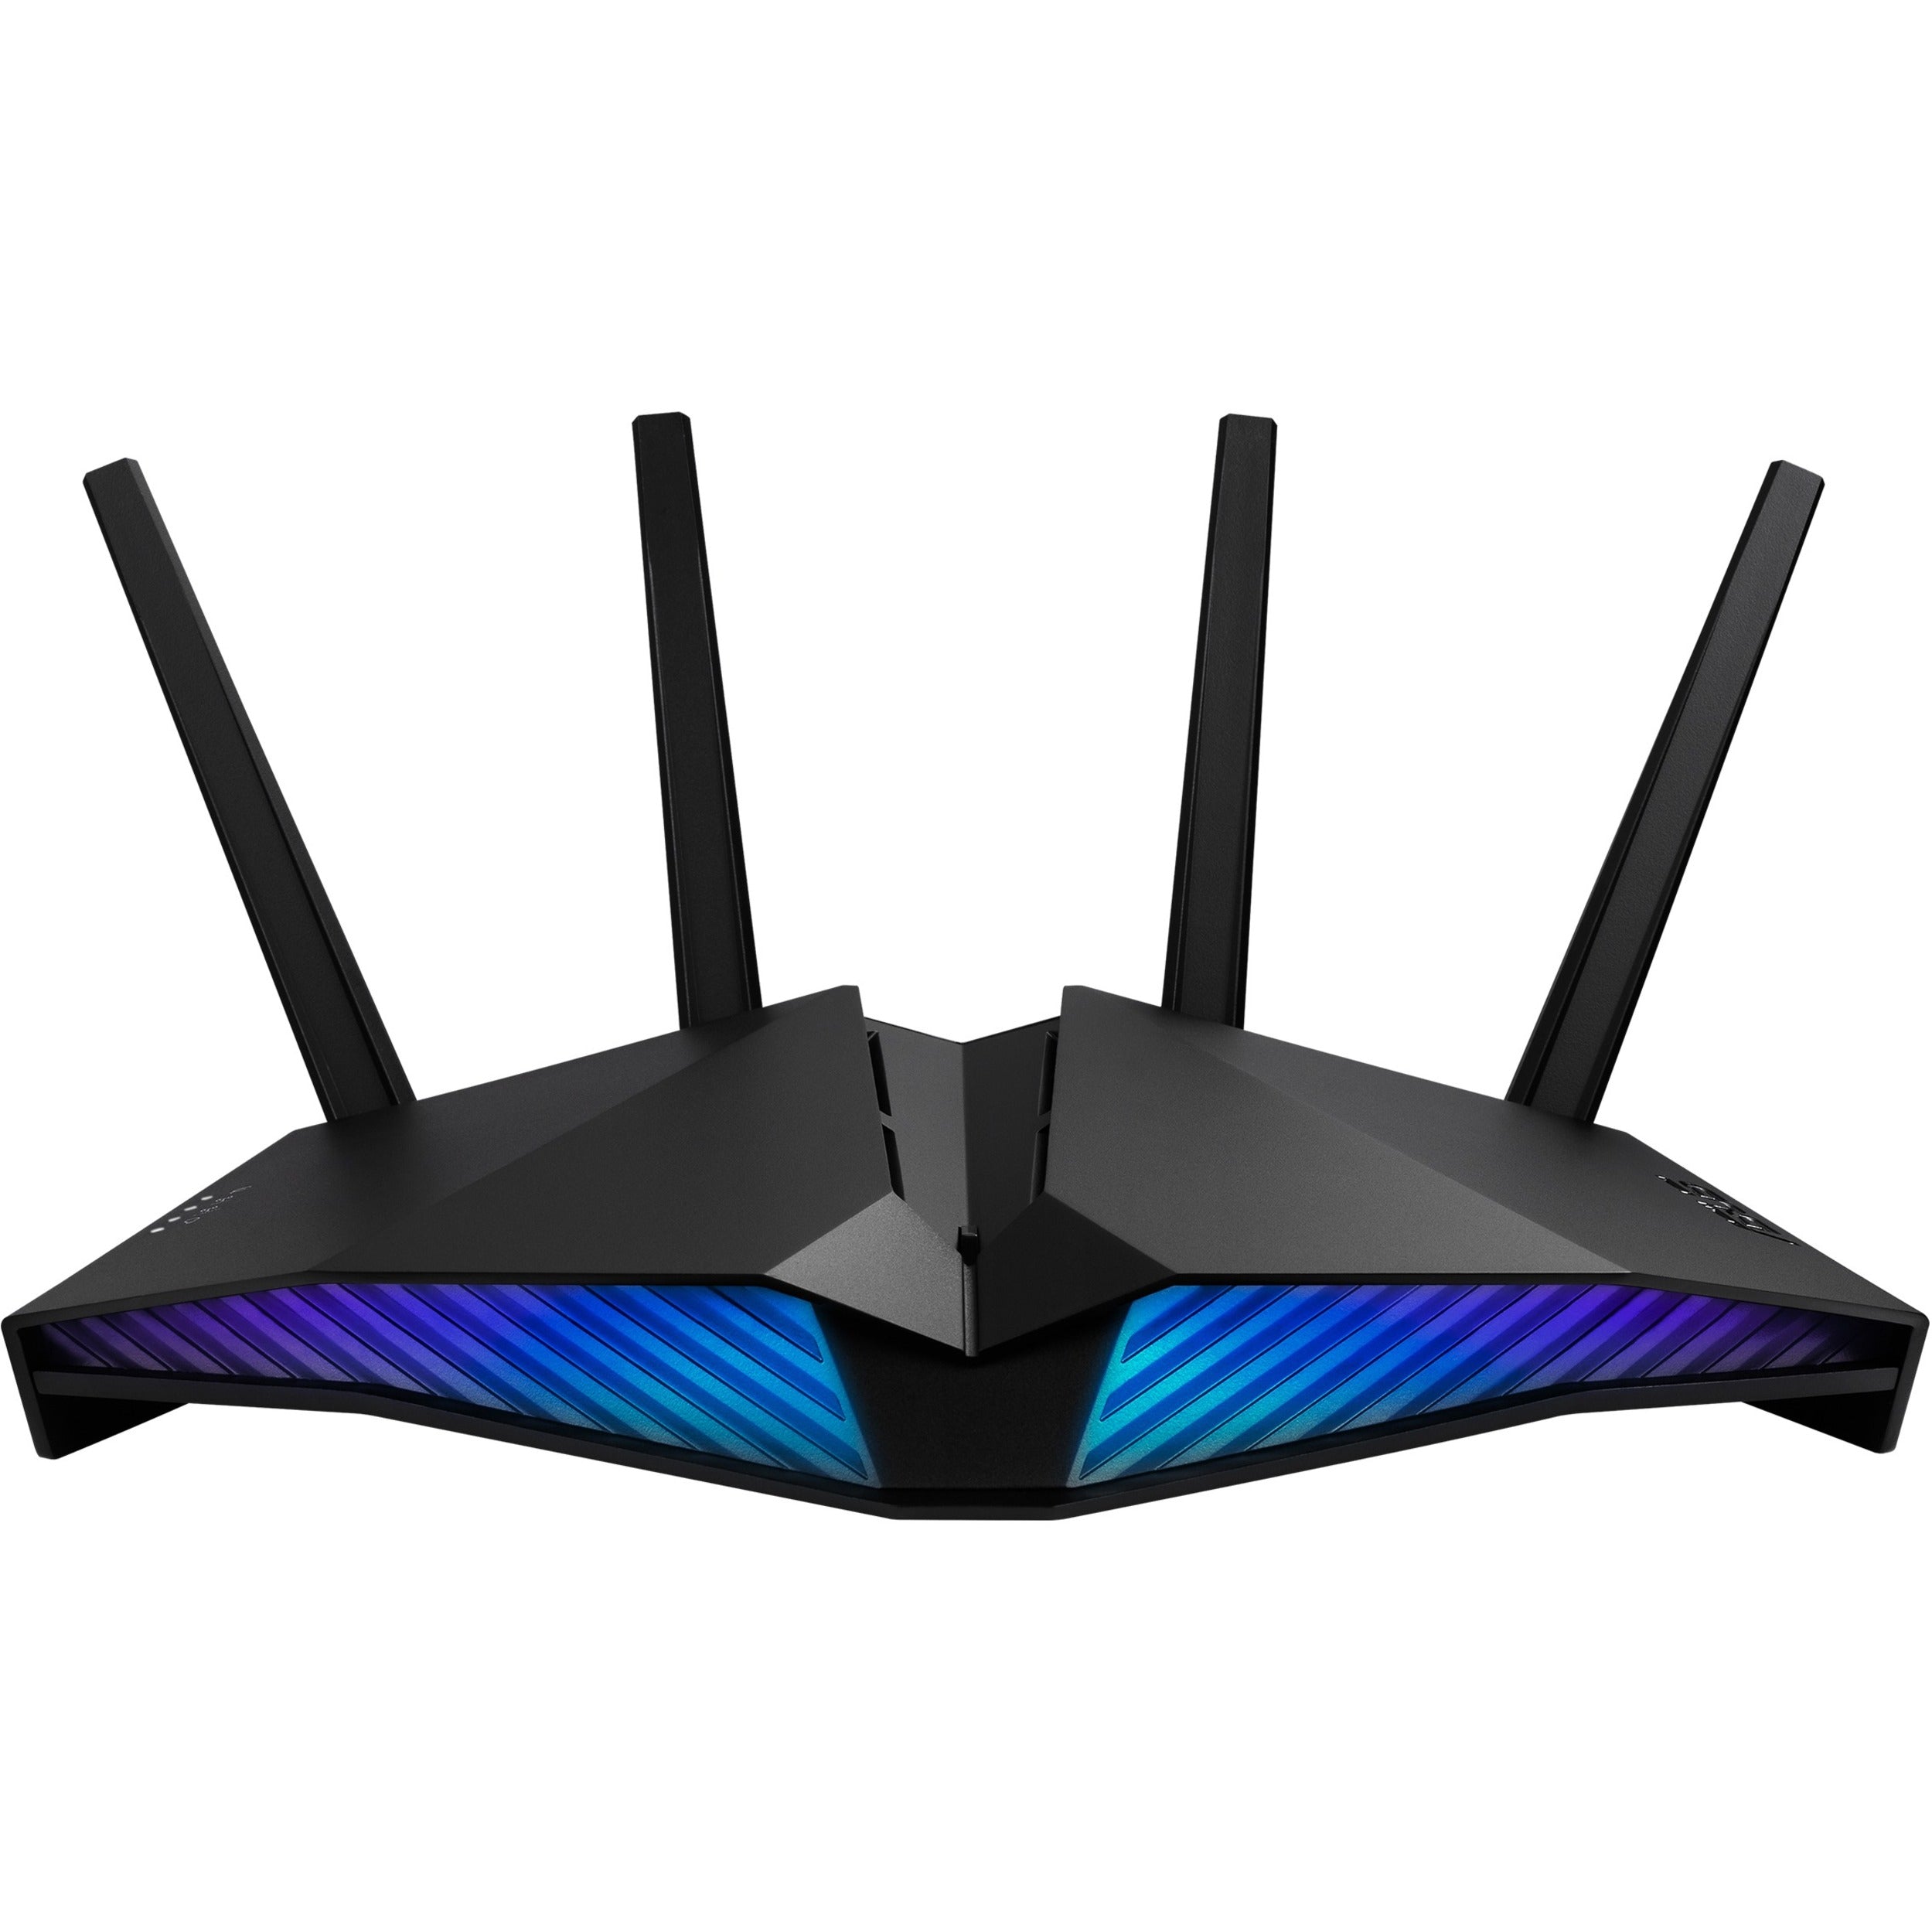 Asus RT-AX82U Wi-Fi 6 IEEE 802.11ax Ethernet Wireless Router, Gigabit Ethernet, 675 MB/s Speed